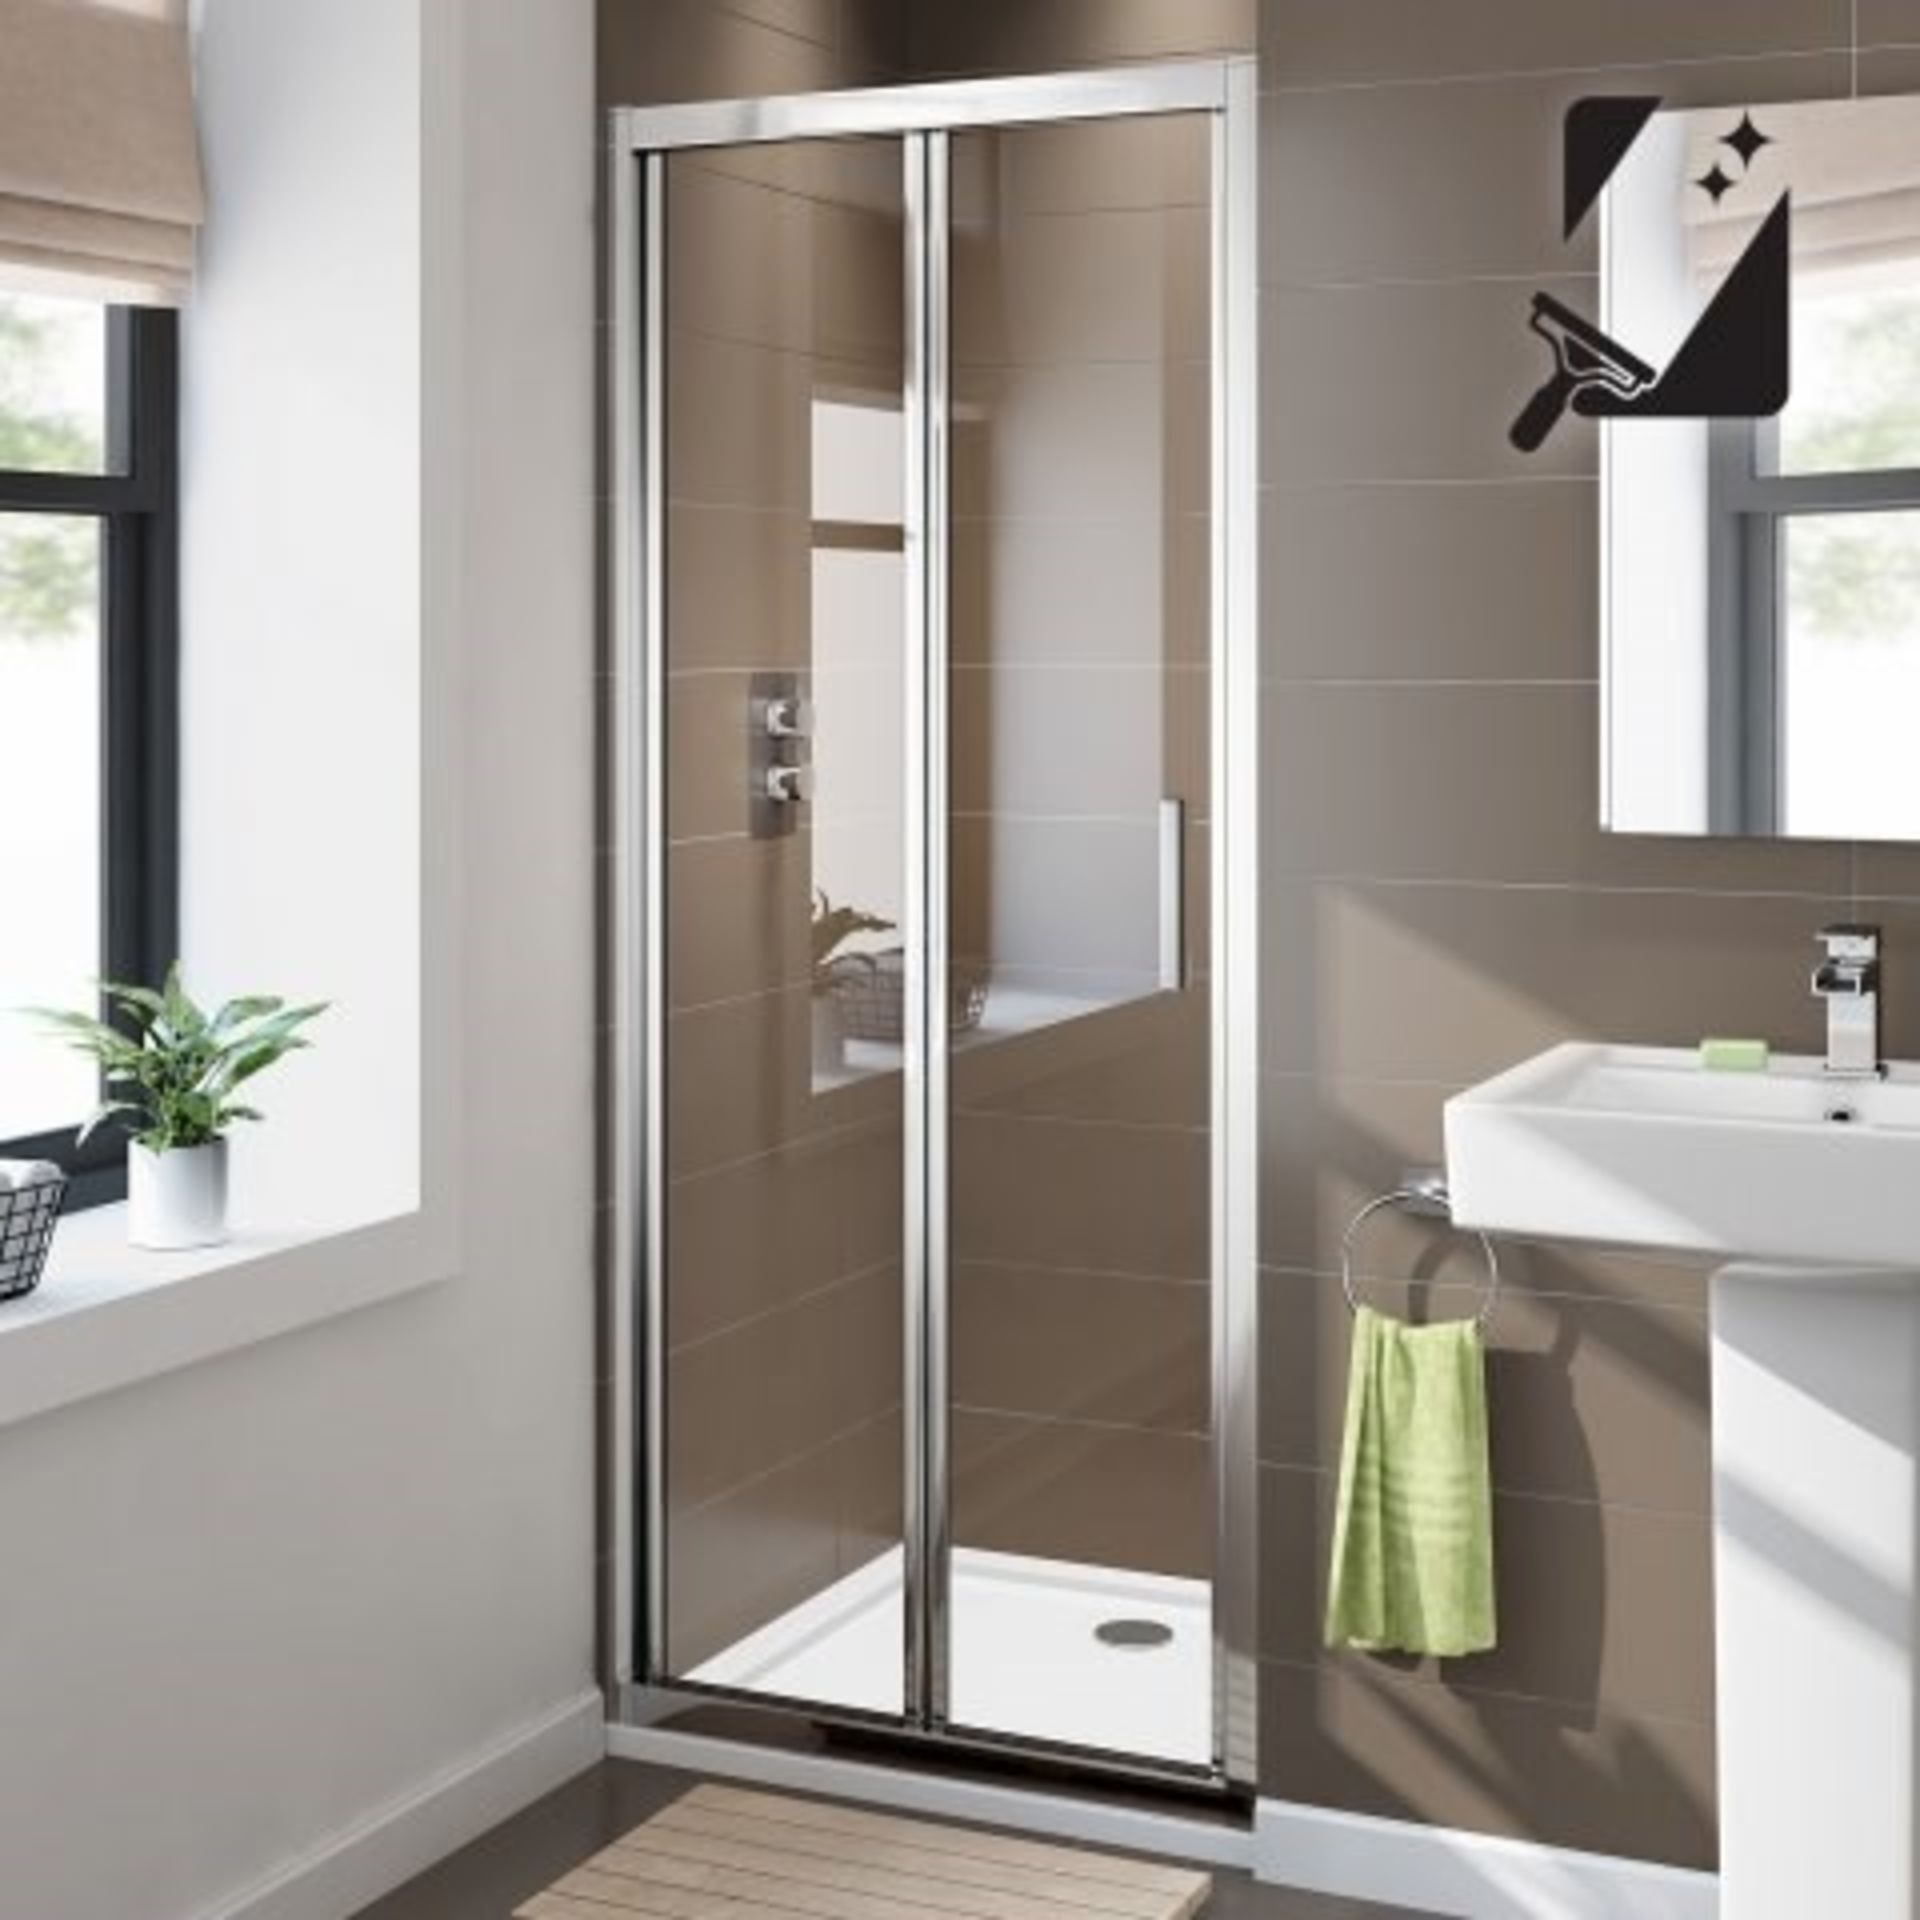 New Twyford's 760mm - 8mm - Premium Easy clean Bifold Shower Door. RRP £379.99.Durability To ... - Image 2 of 2